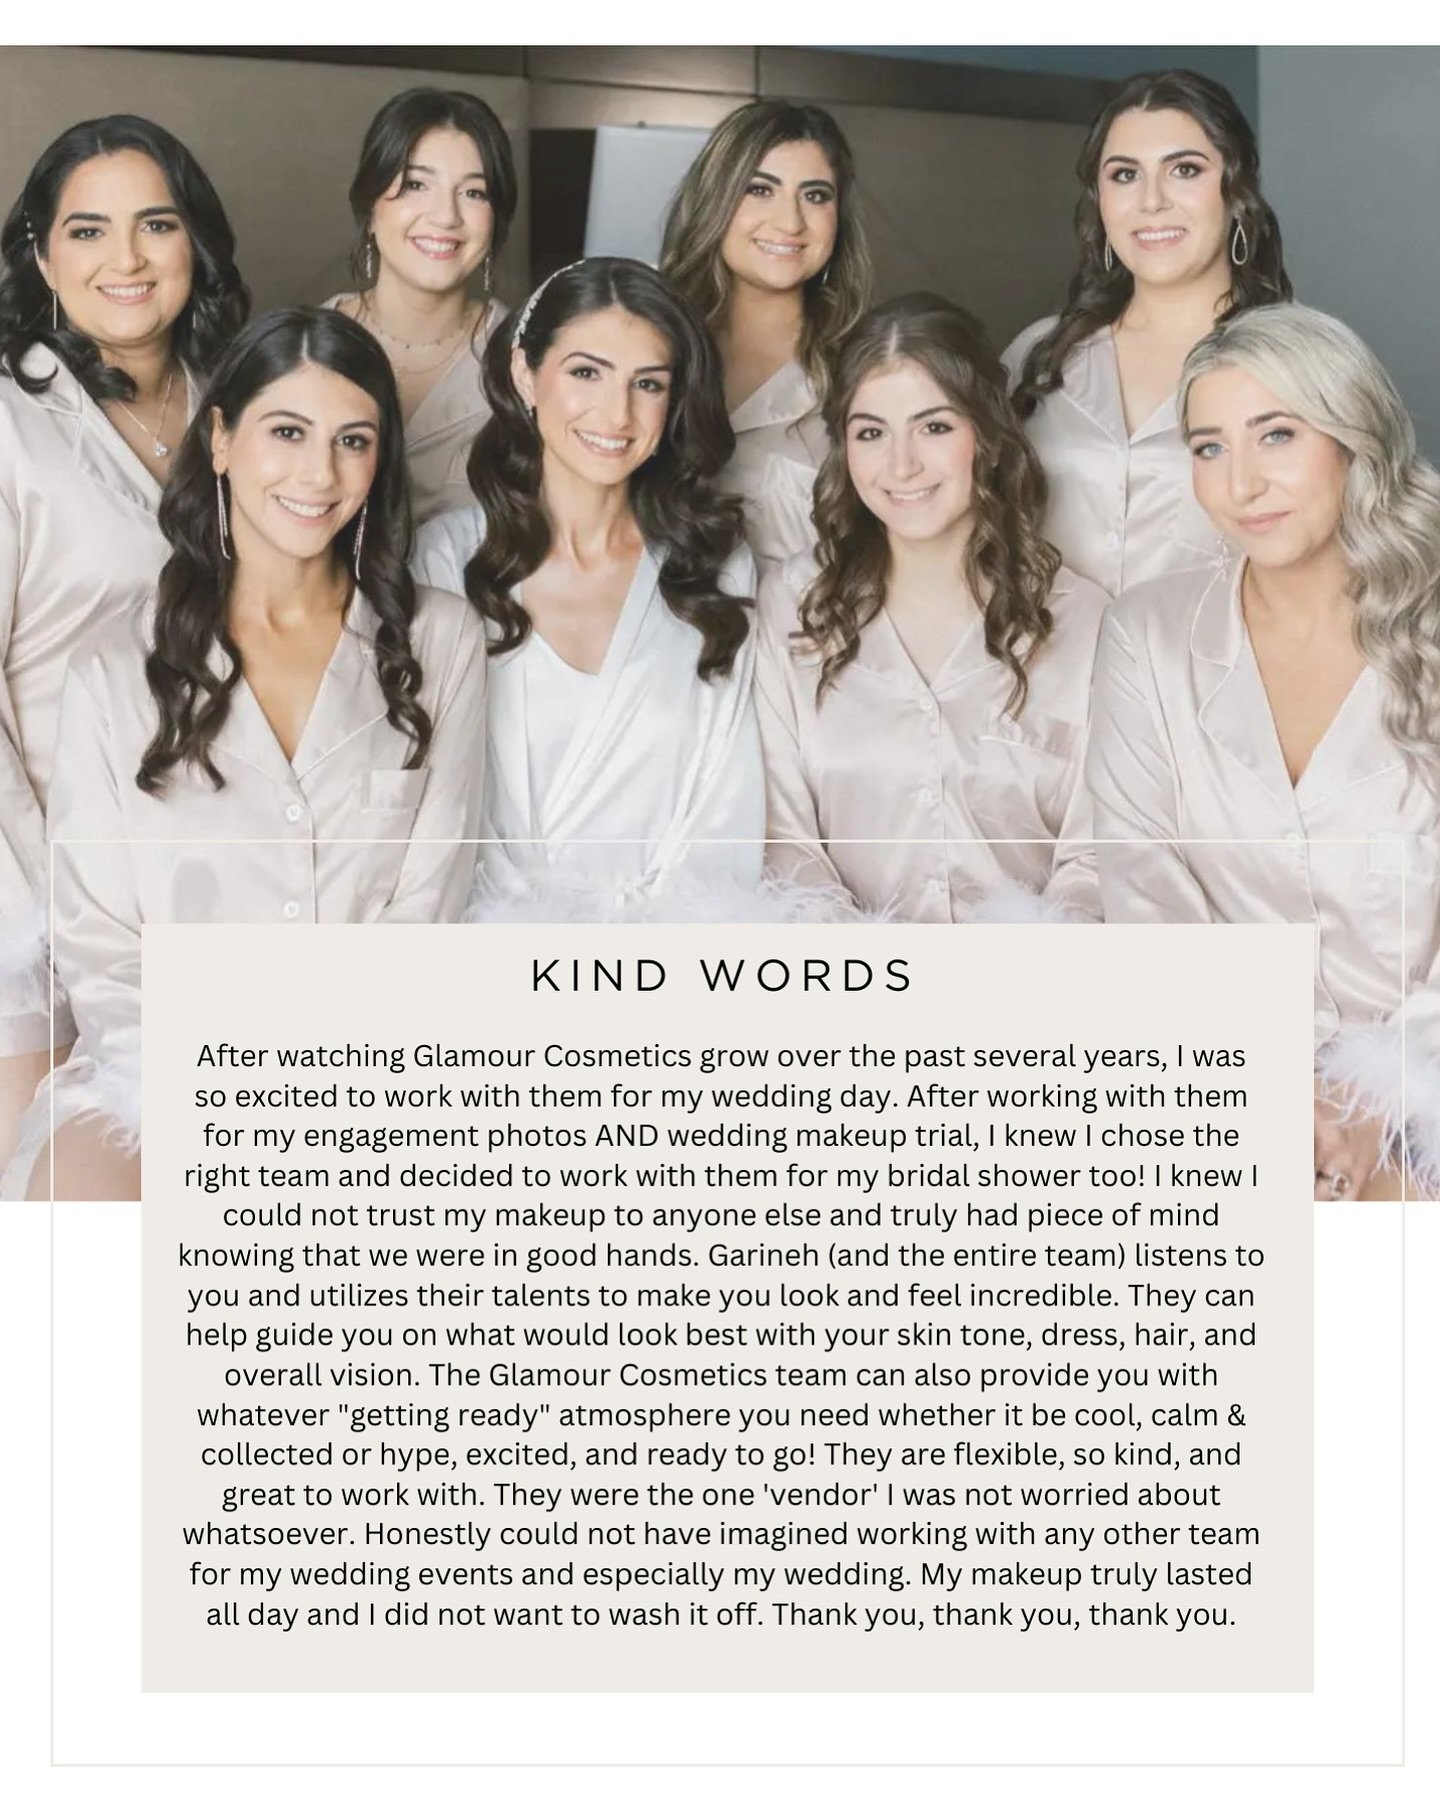 Thank you Rebecca for your kind words!! It was a pleasure glamming you and your bridal party! 🥂✨

Makeup @glamourcosmetics_team 
Hair @racheljackbeauty 
Planning @taylored.events_ 
Photo @vsphotography_insta 

💌 We are booking out 2024 and have off